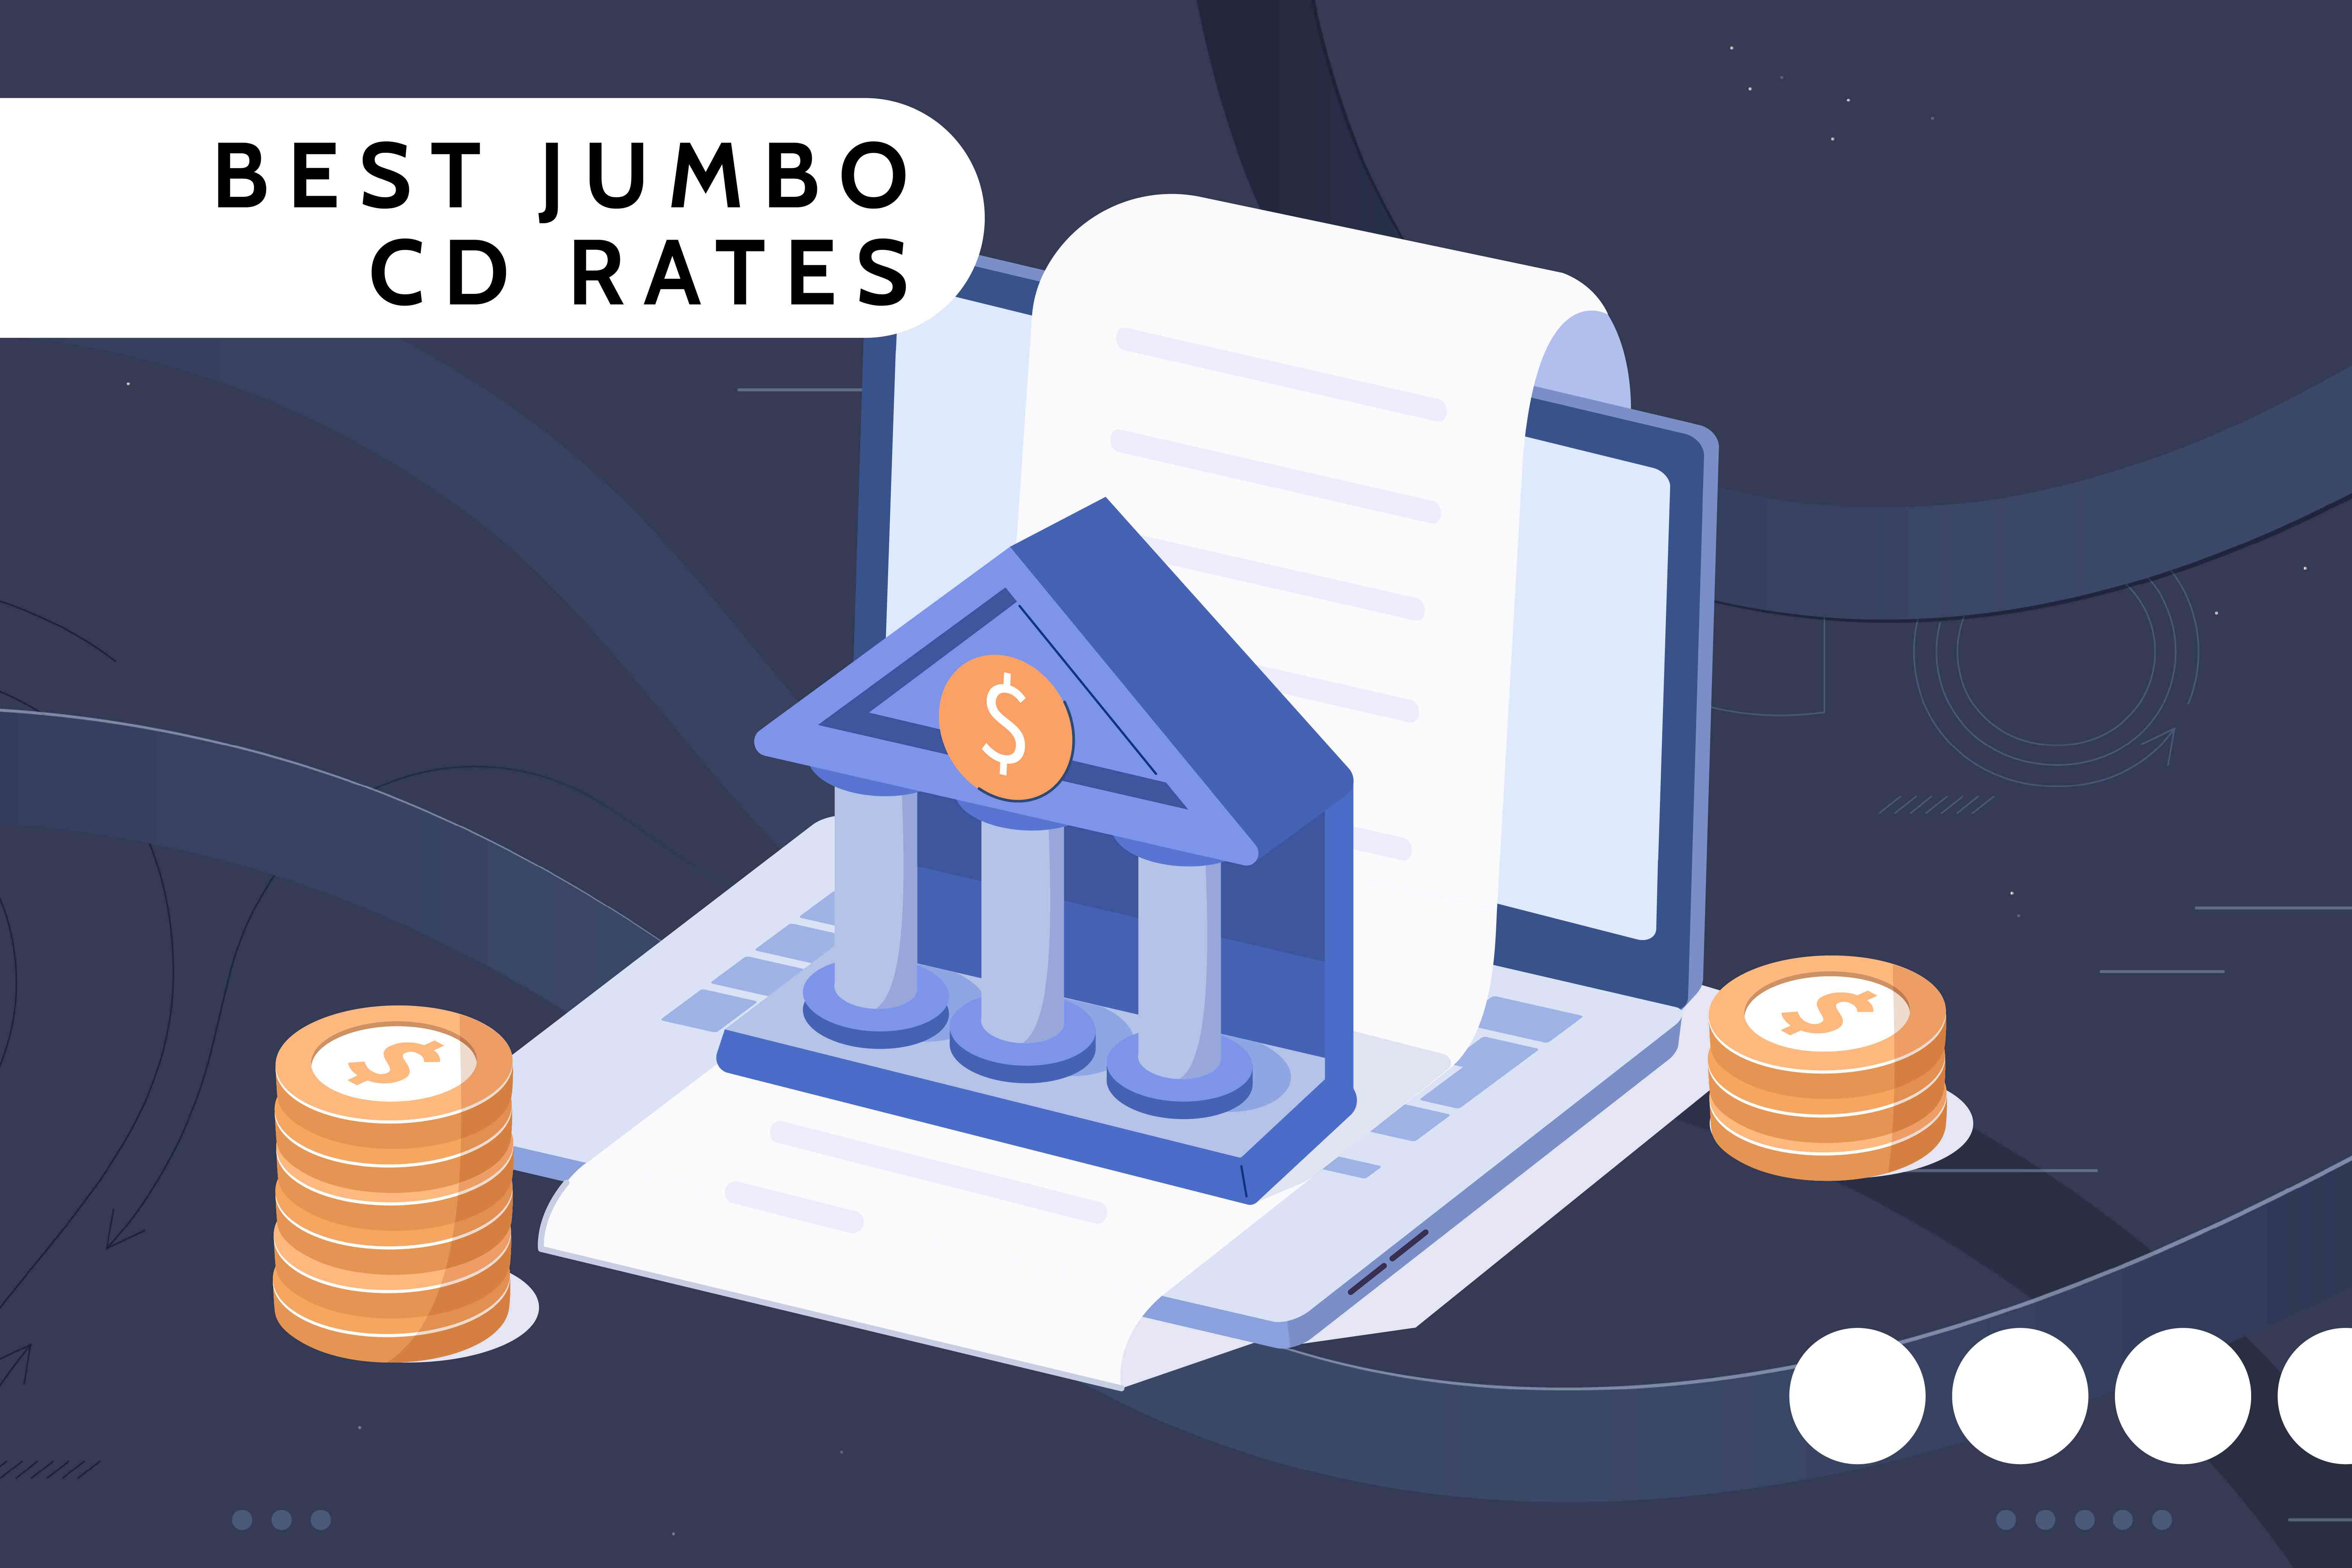 Investopedia custom visual asset showing a bank, laptop and coin, with the title "Best jumbo CD rates"